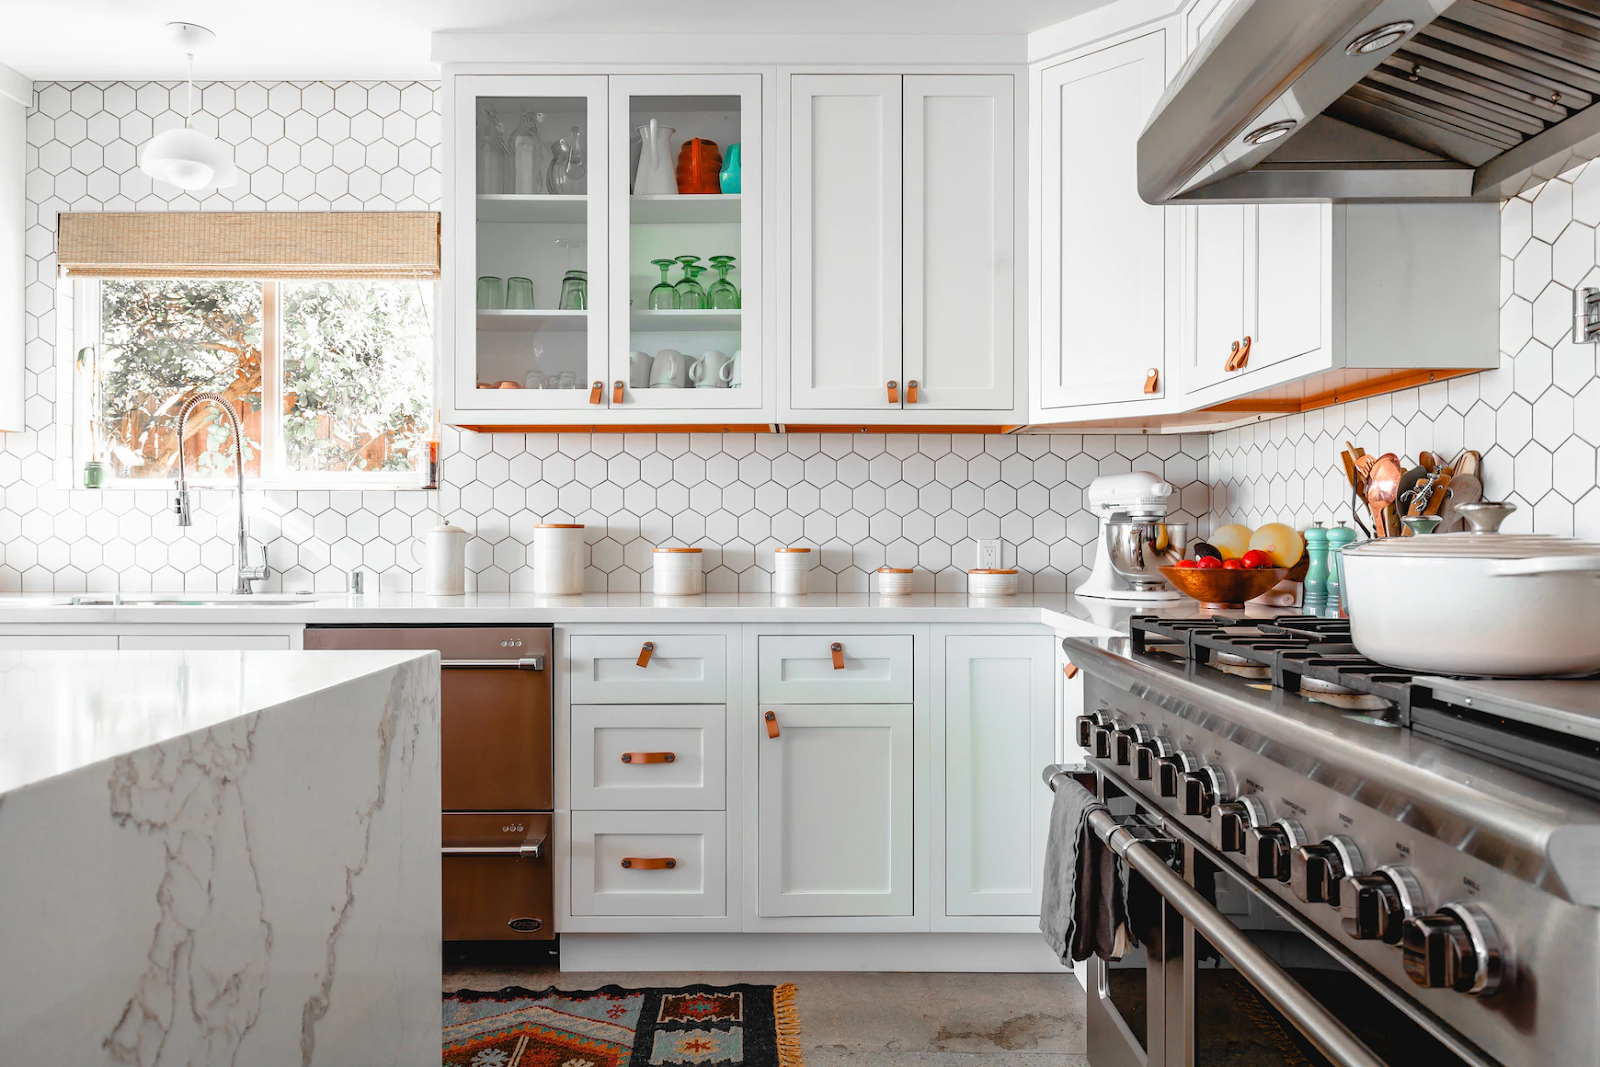 Design Tips to Level Up Your Kitchen